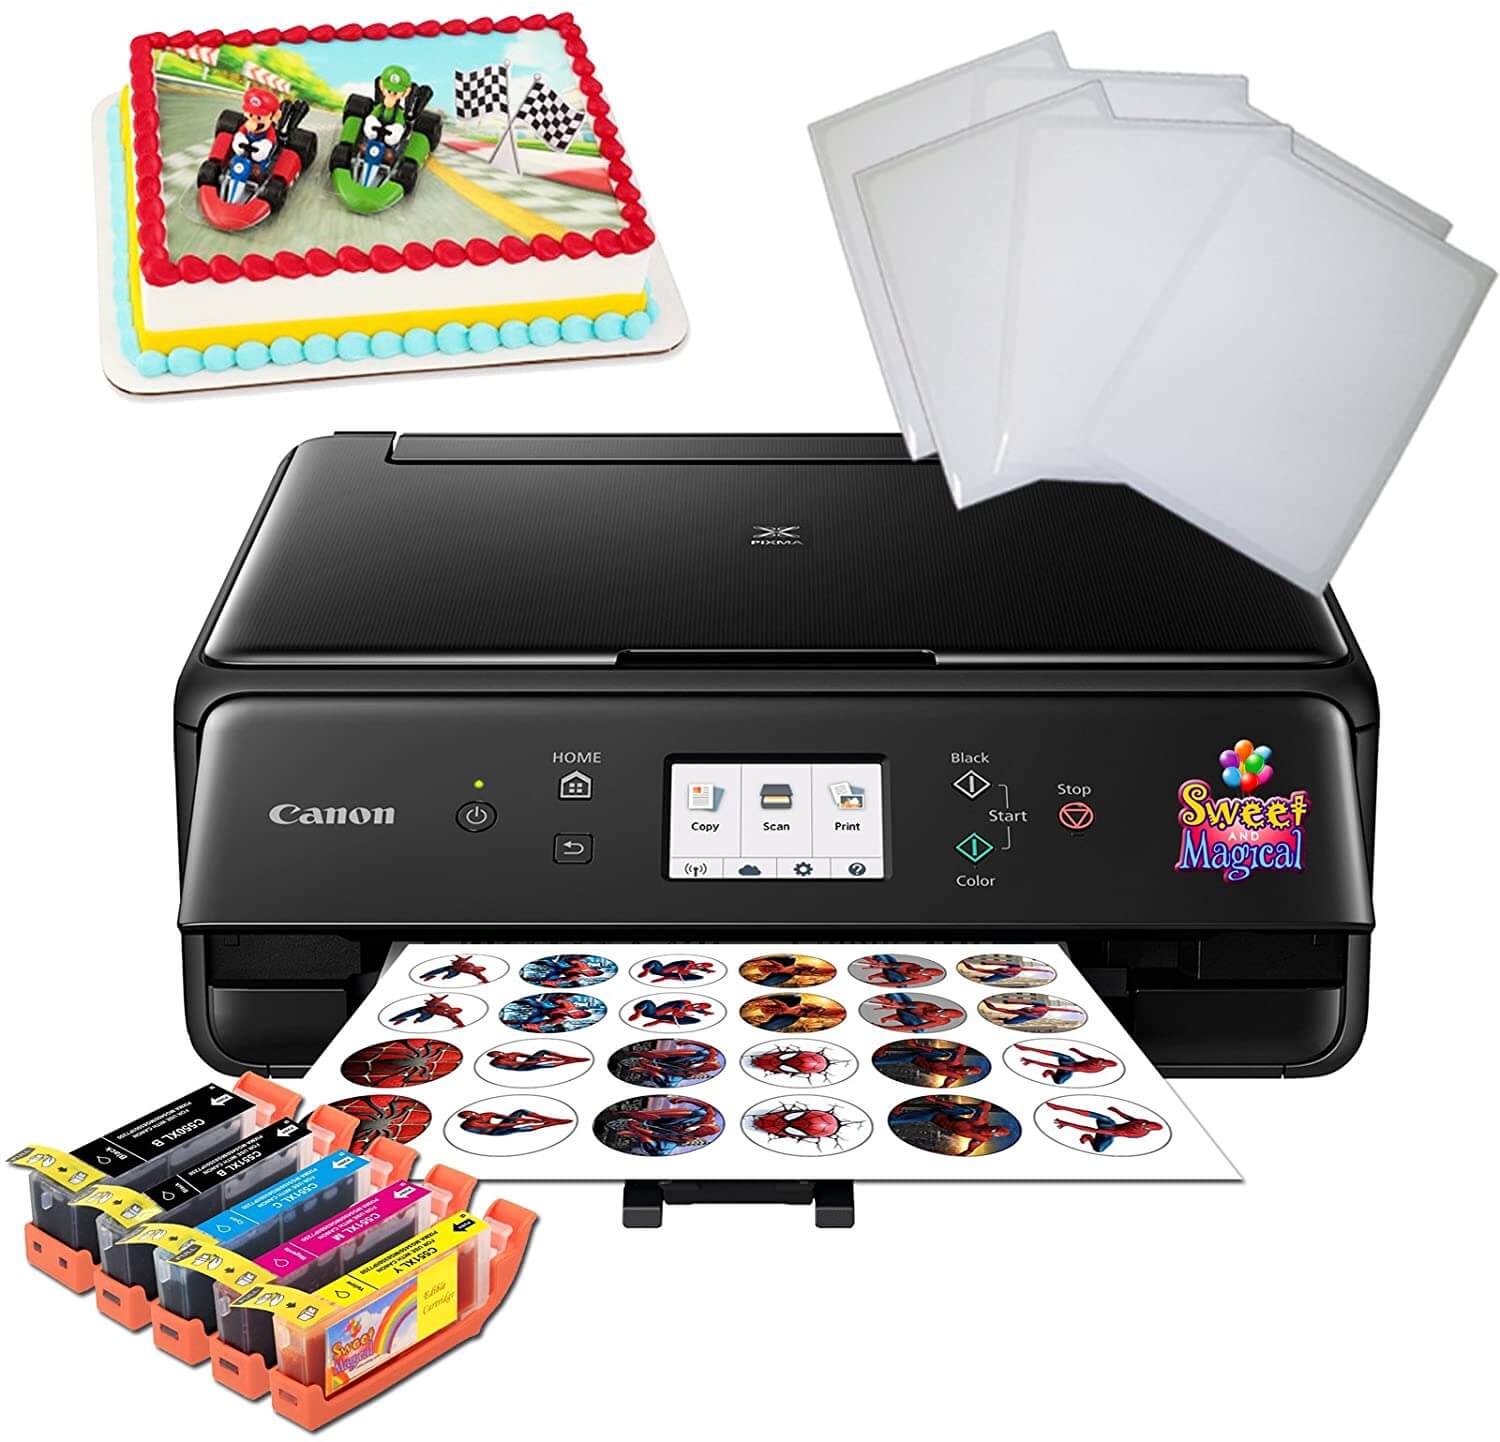 edible-printer-ink-frosting-and-wafer-paper-cake-decorating